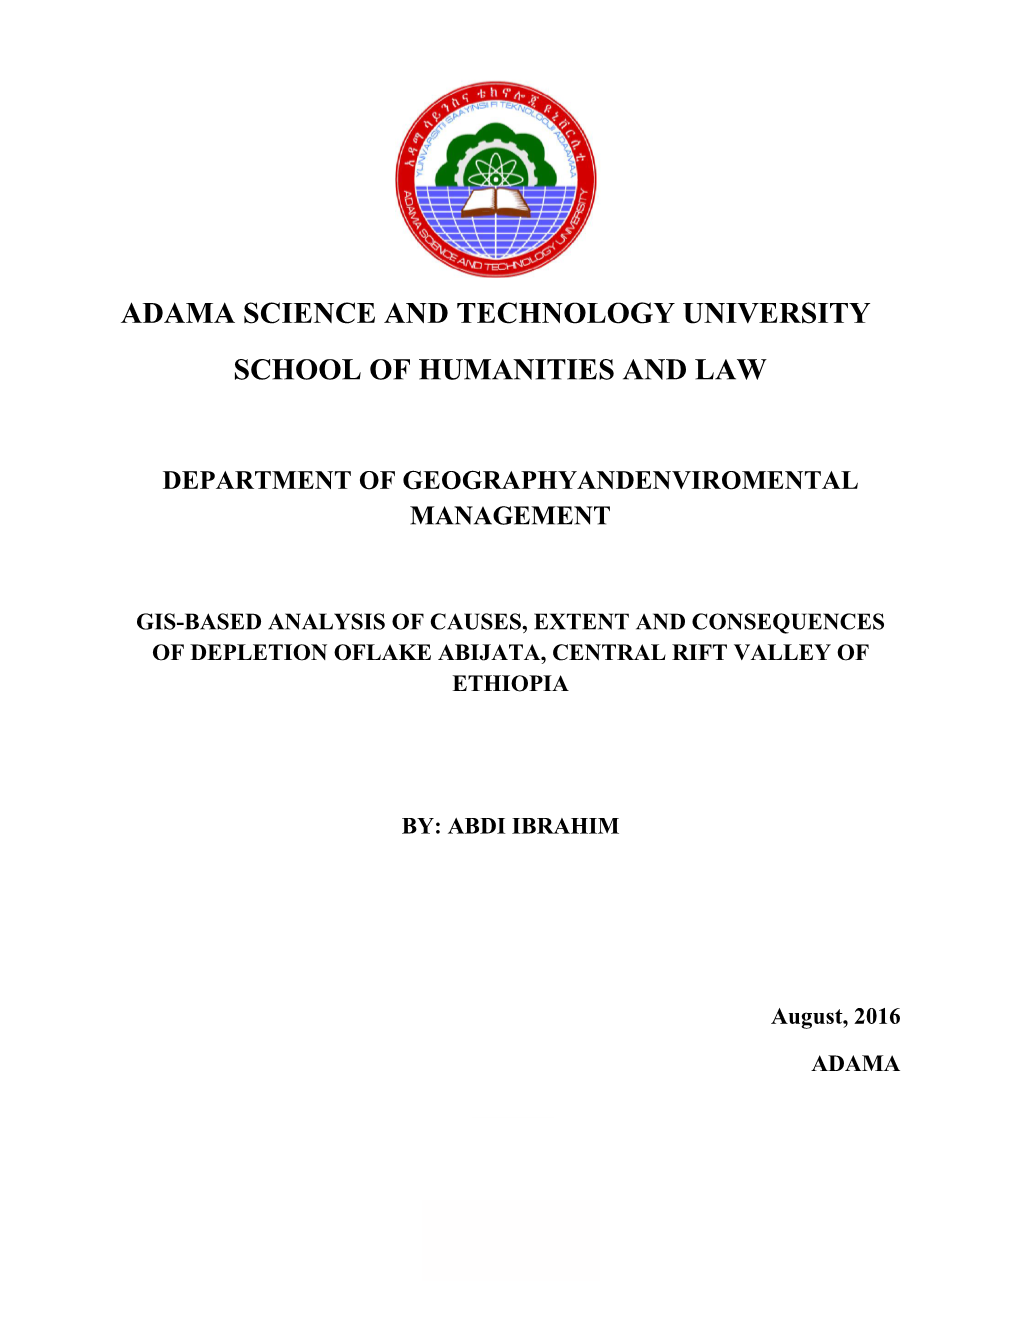 Adama Science and Technology University School of Humanities and Law